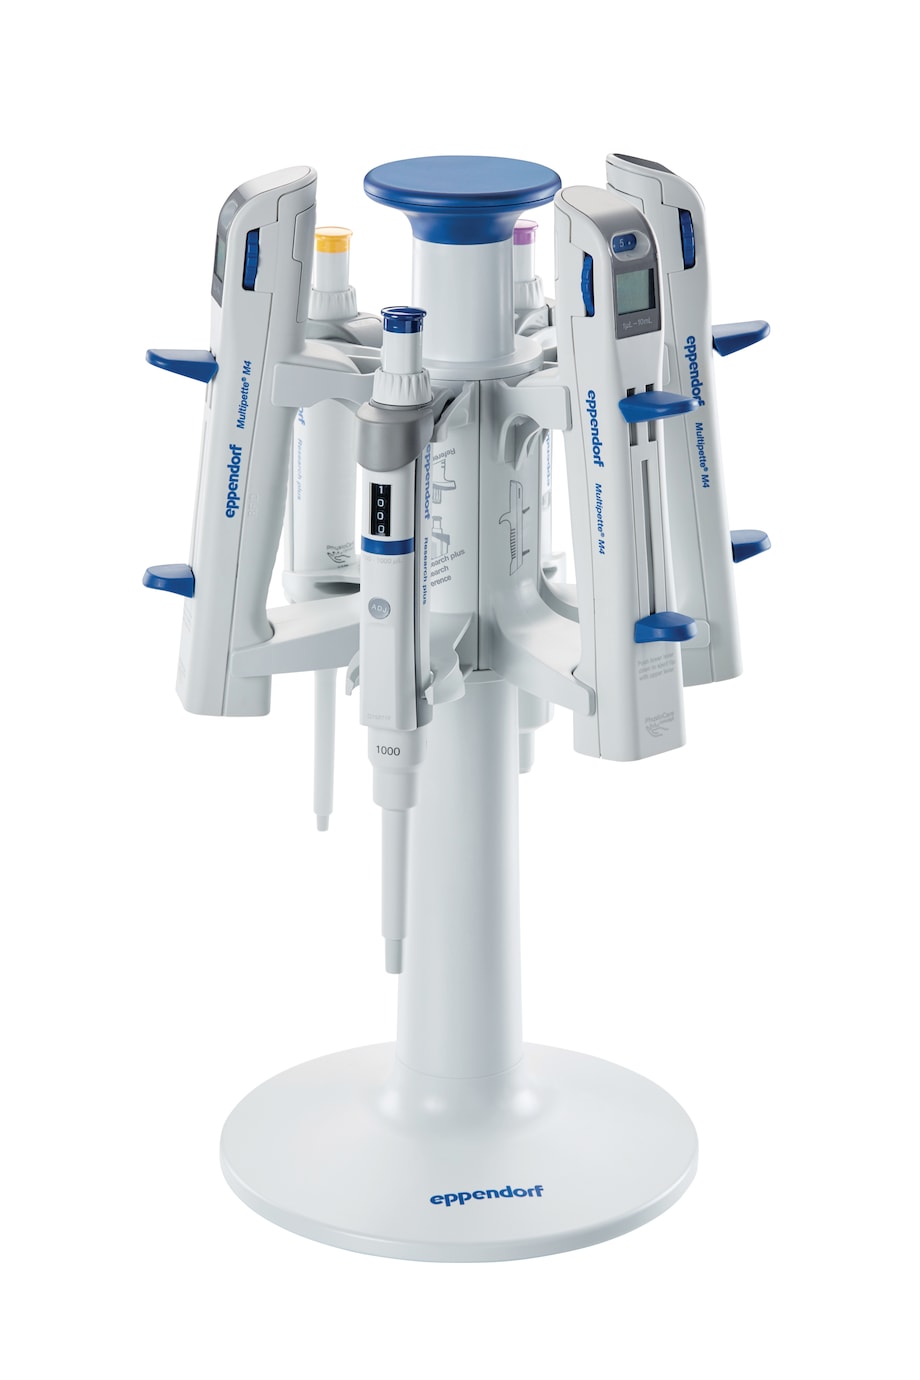 Store your Repeater® M4 multi-dispenser securely on a Pipette Carousel 2 or Charger Carousel 2 by Eppendorf